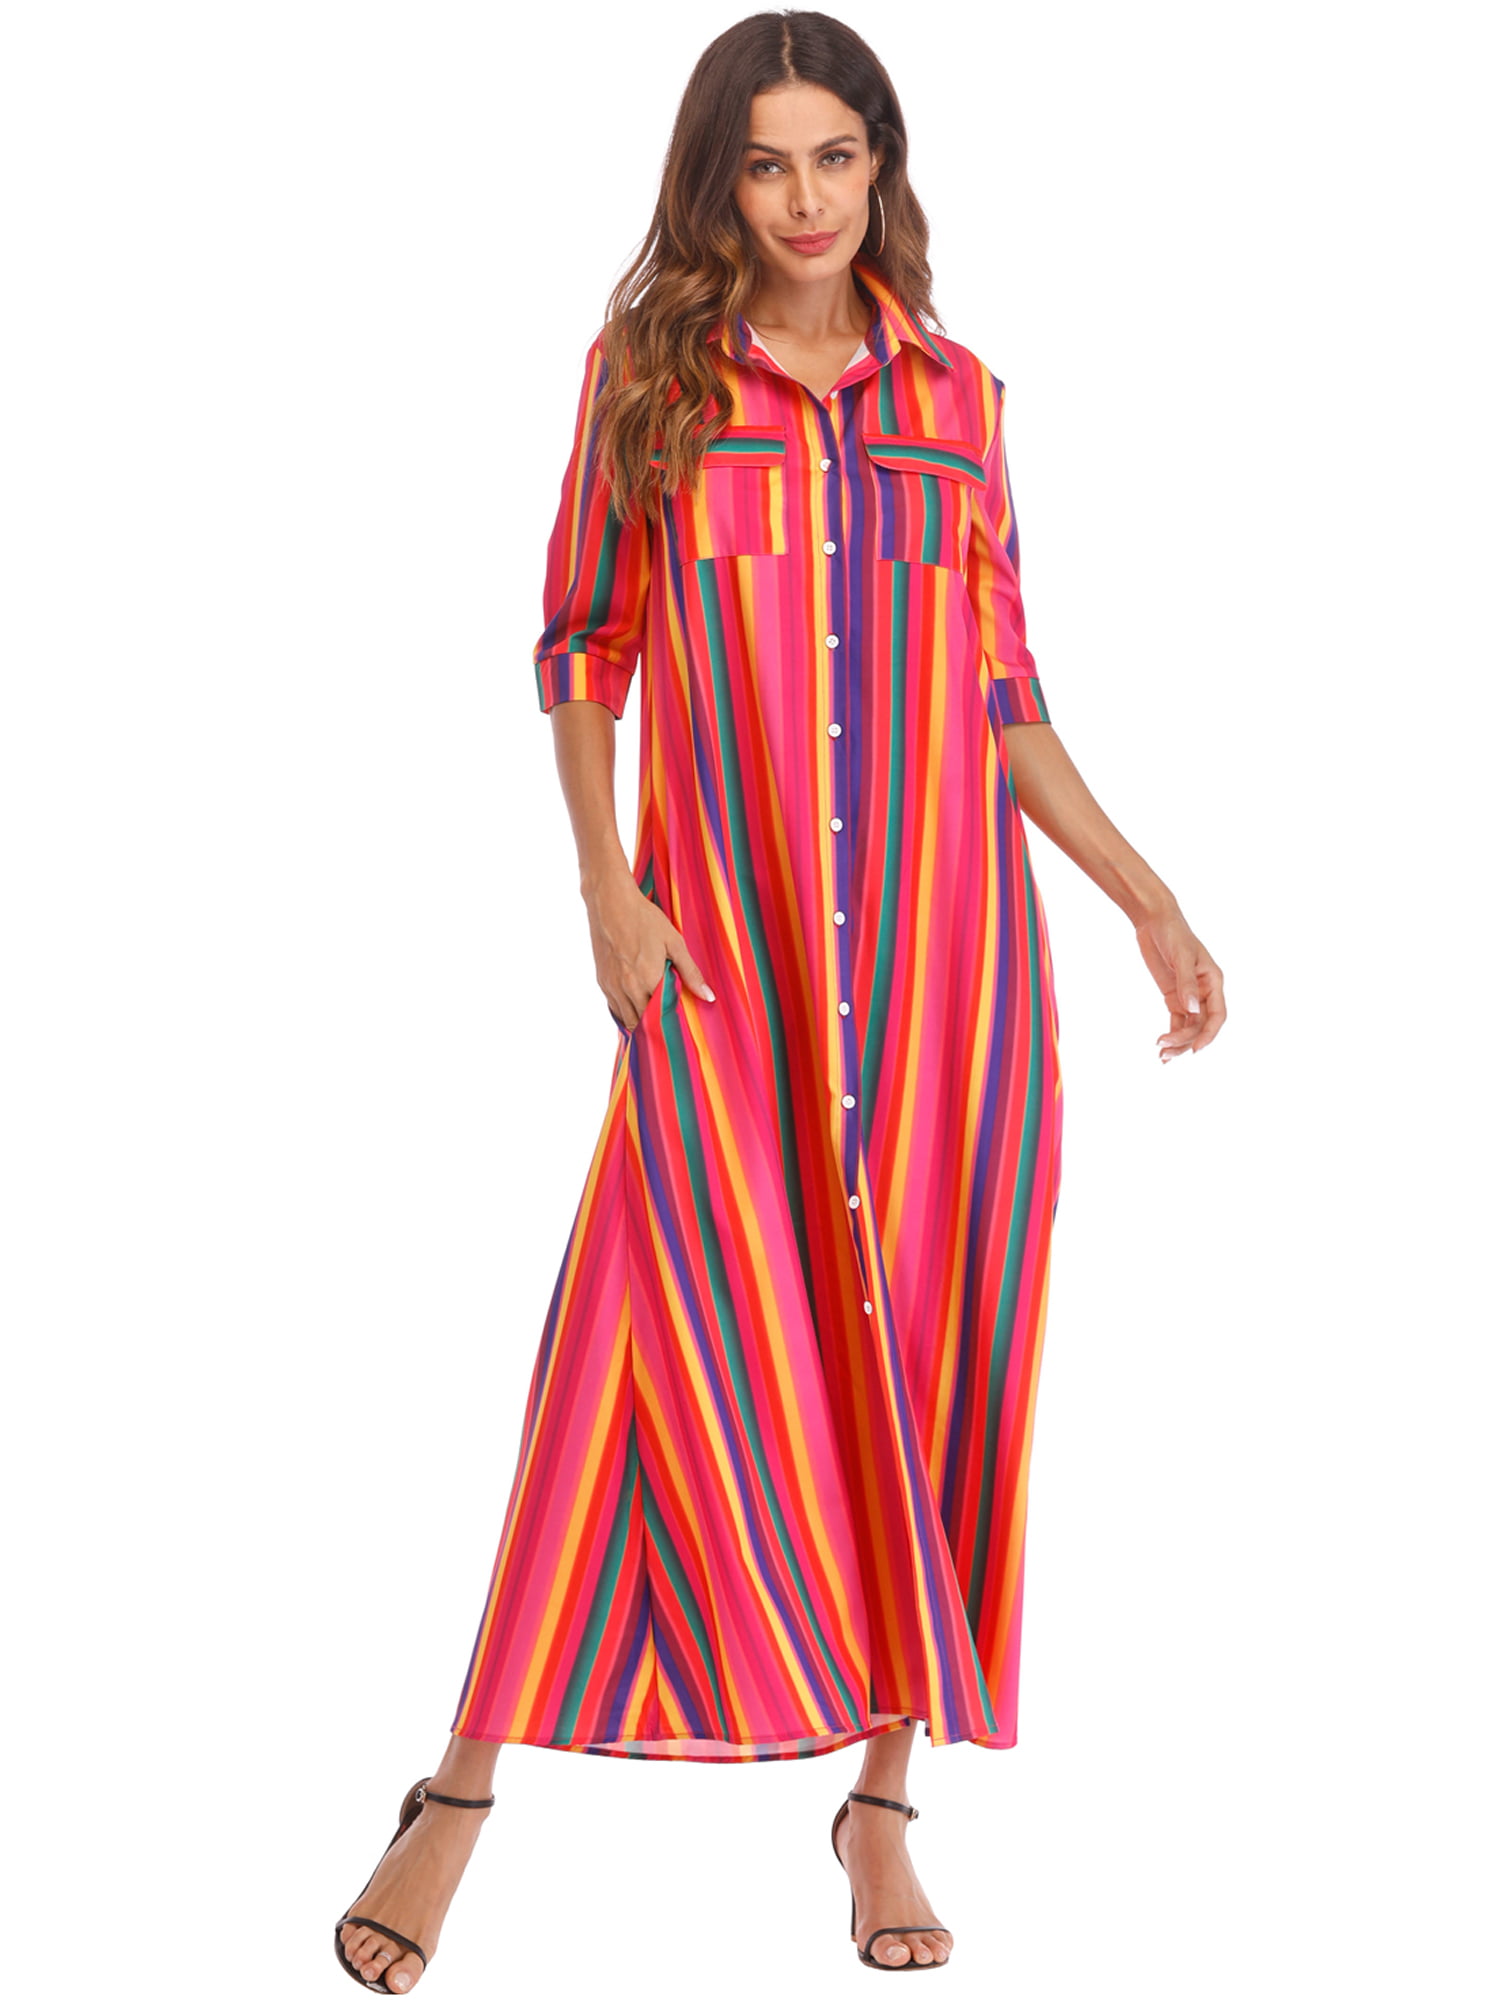 Casual Maxi Dress for Women,Rainbow Button Down Roll up Sleeve Long Dress,Stripes Print Loose Long Maxi Dresses with Pockets 